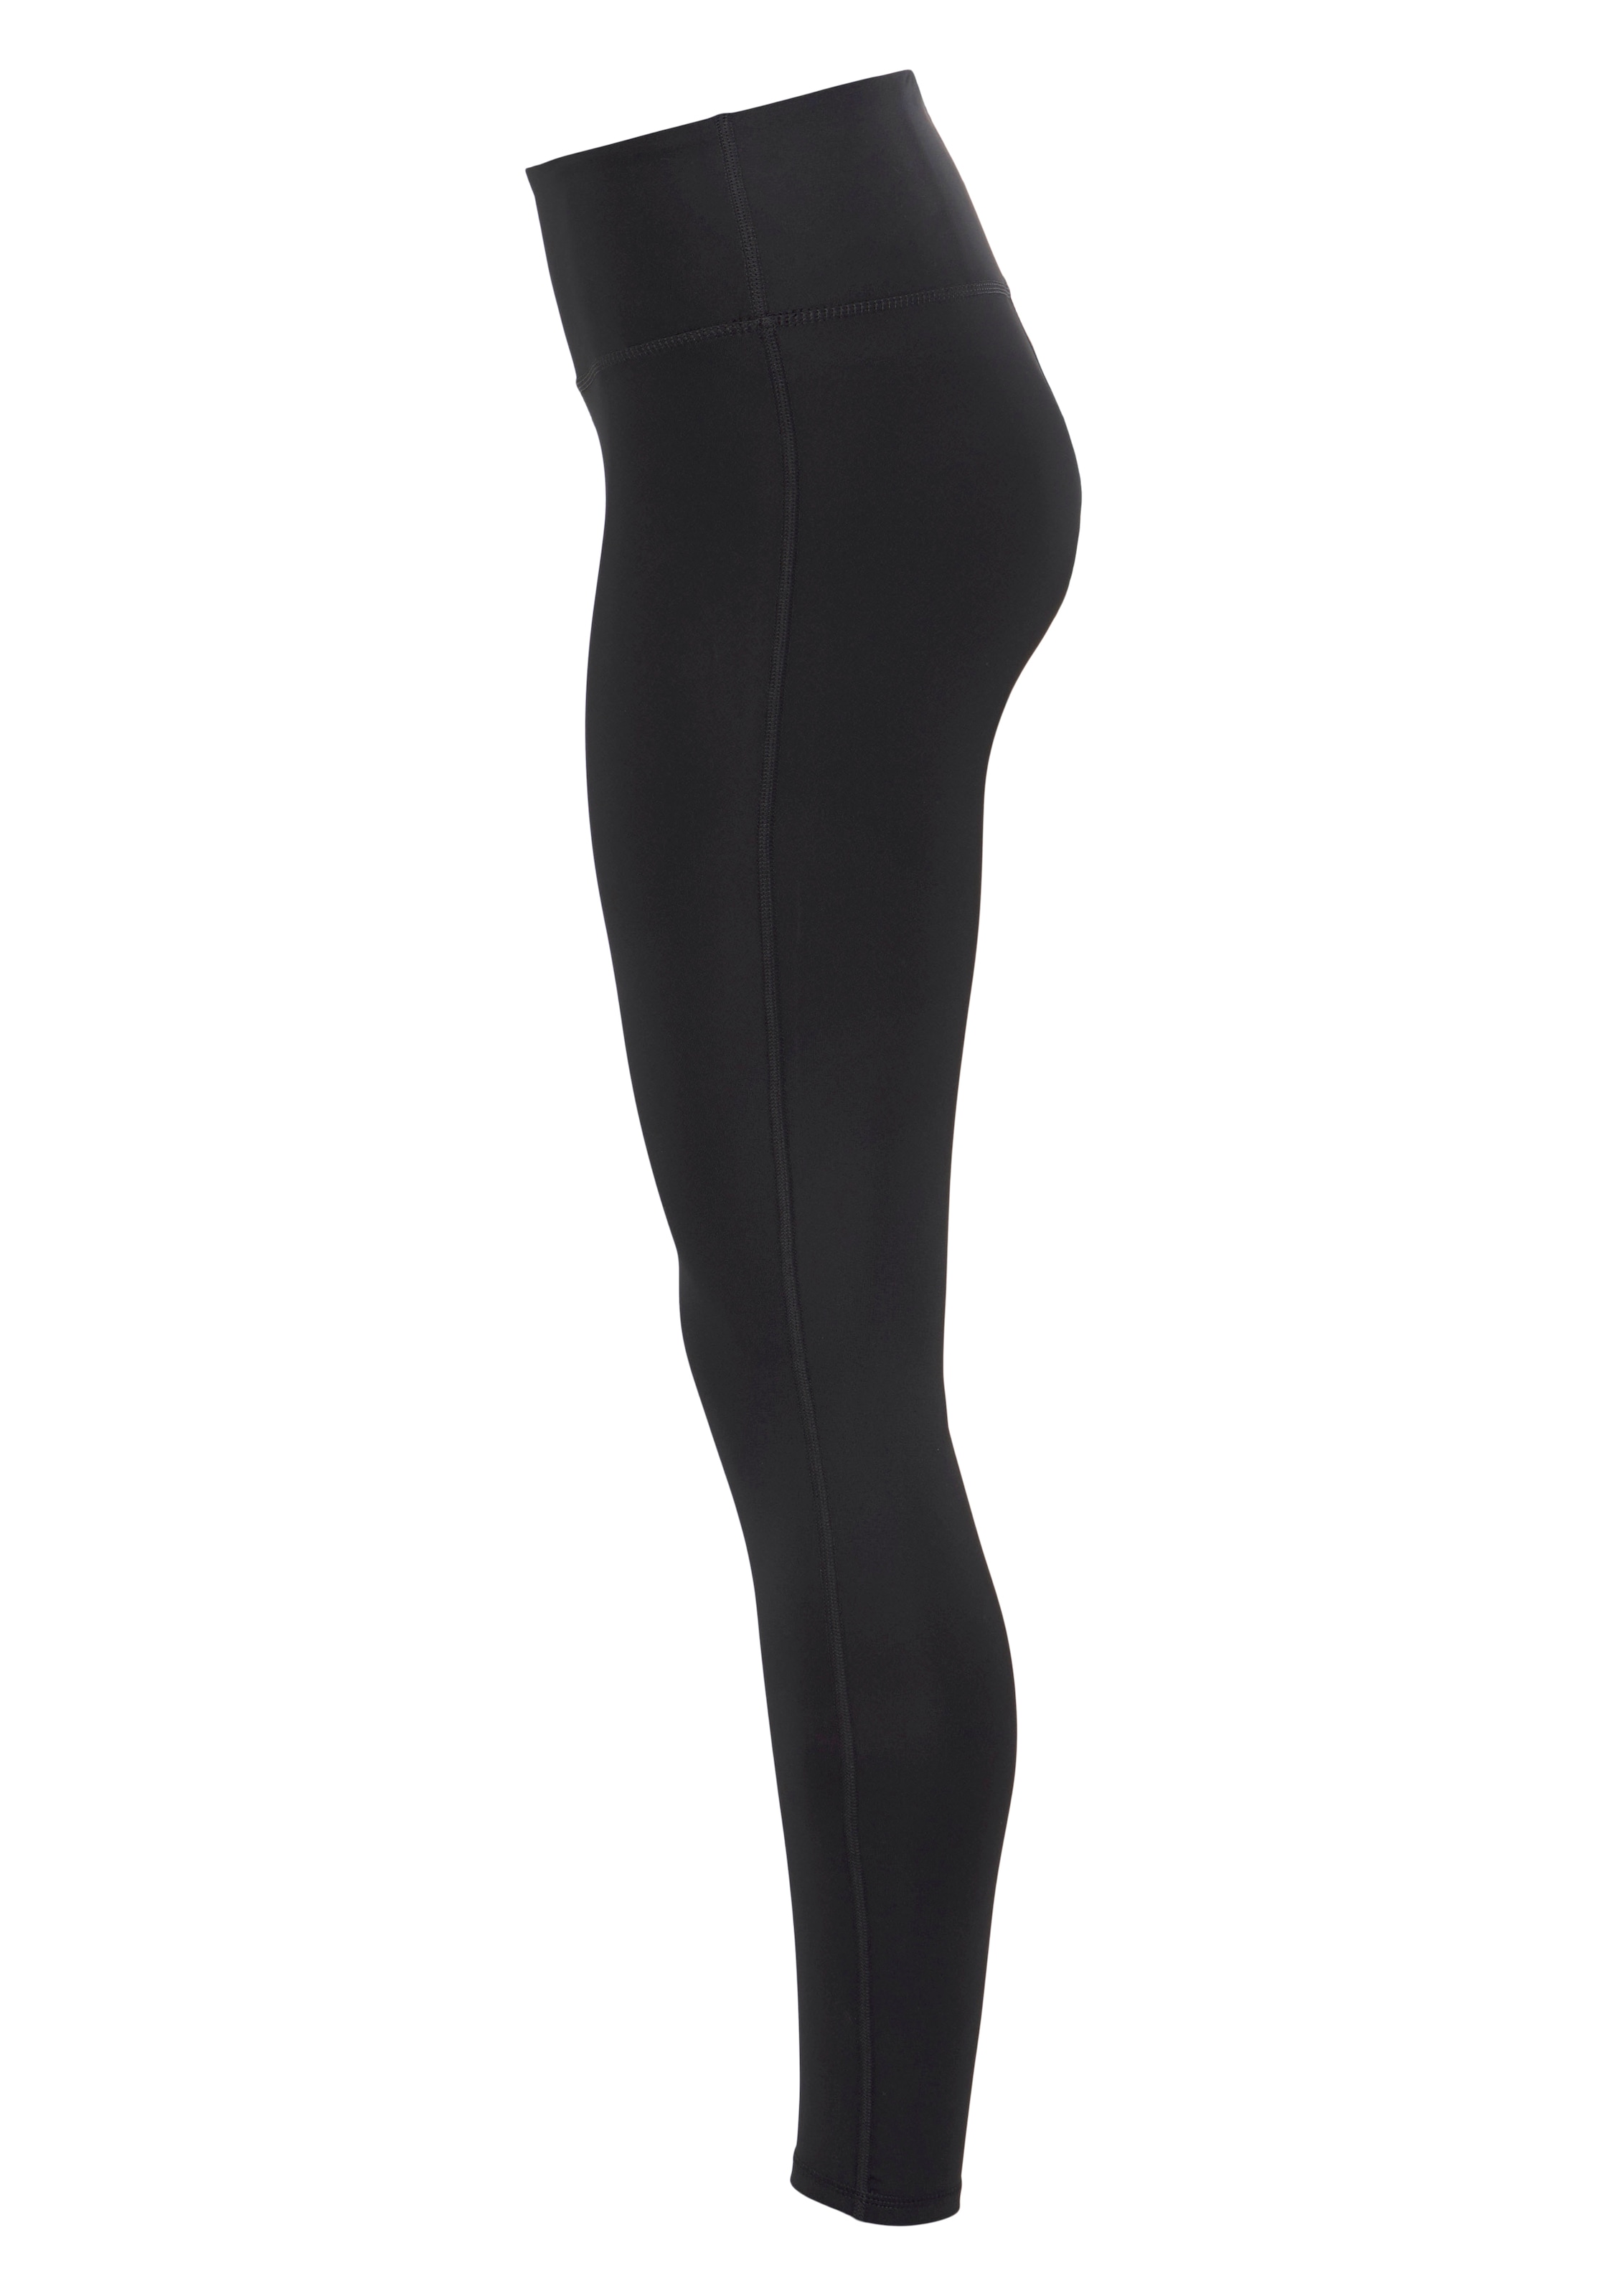 »WINTER ESSENTIAL WARM online North Funktionstights Face LEGGING« The